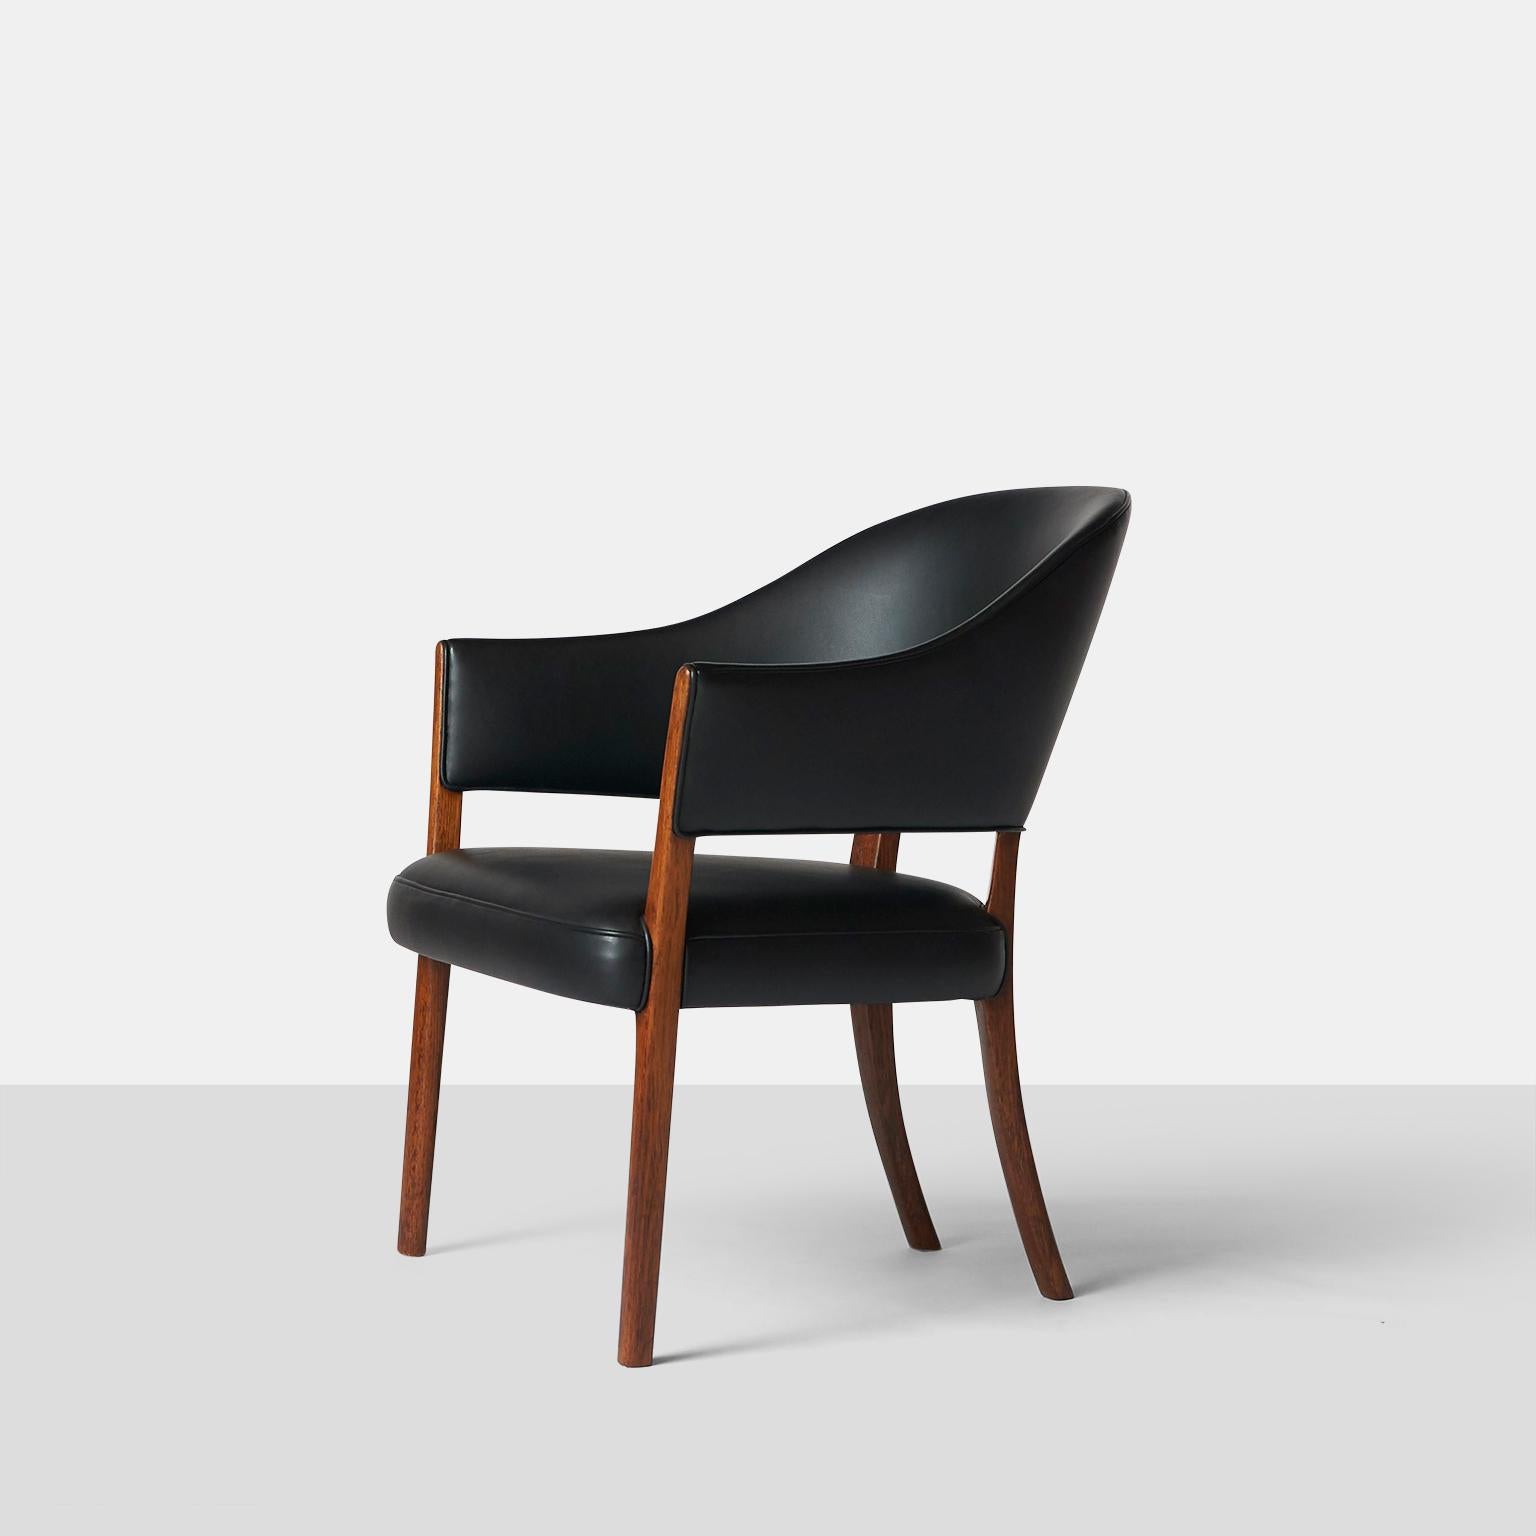 An easy chair with frame of rosewood. Seat and back upholstered with patinated black leather. Made by cabinetmaker A. J. Iversen, Copenhagen. The model was presented at the 1962 Copenhagen cabinetmakers guild's exhibition.

Refinished in black